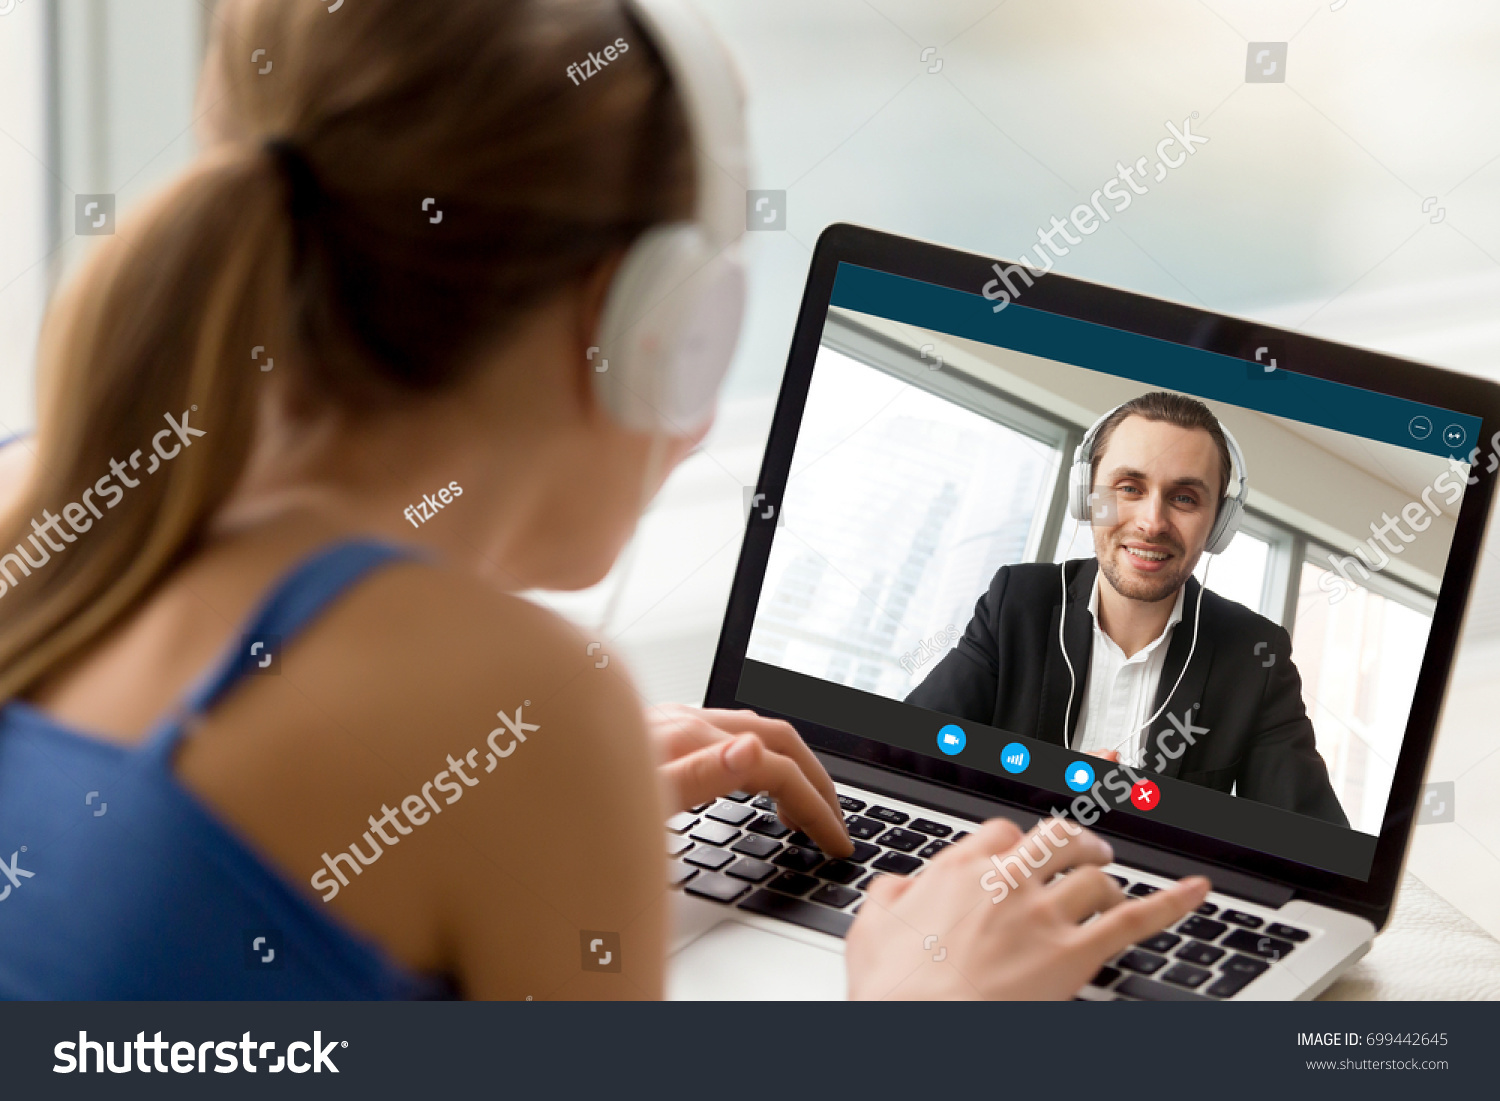 Man and woman in headphones communicating online by video call, looking at full screen videoconferencing app window, webcam videochat, virtual dating, long distance relationships, close up rear view #699442645